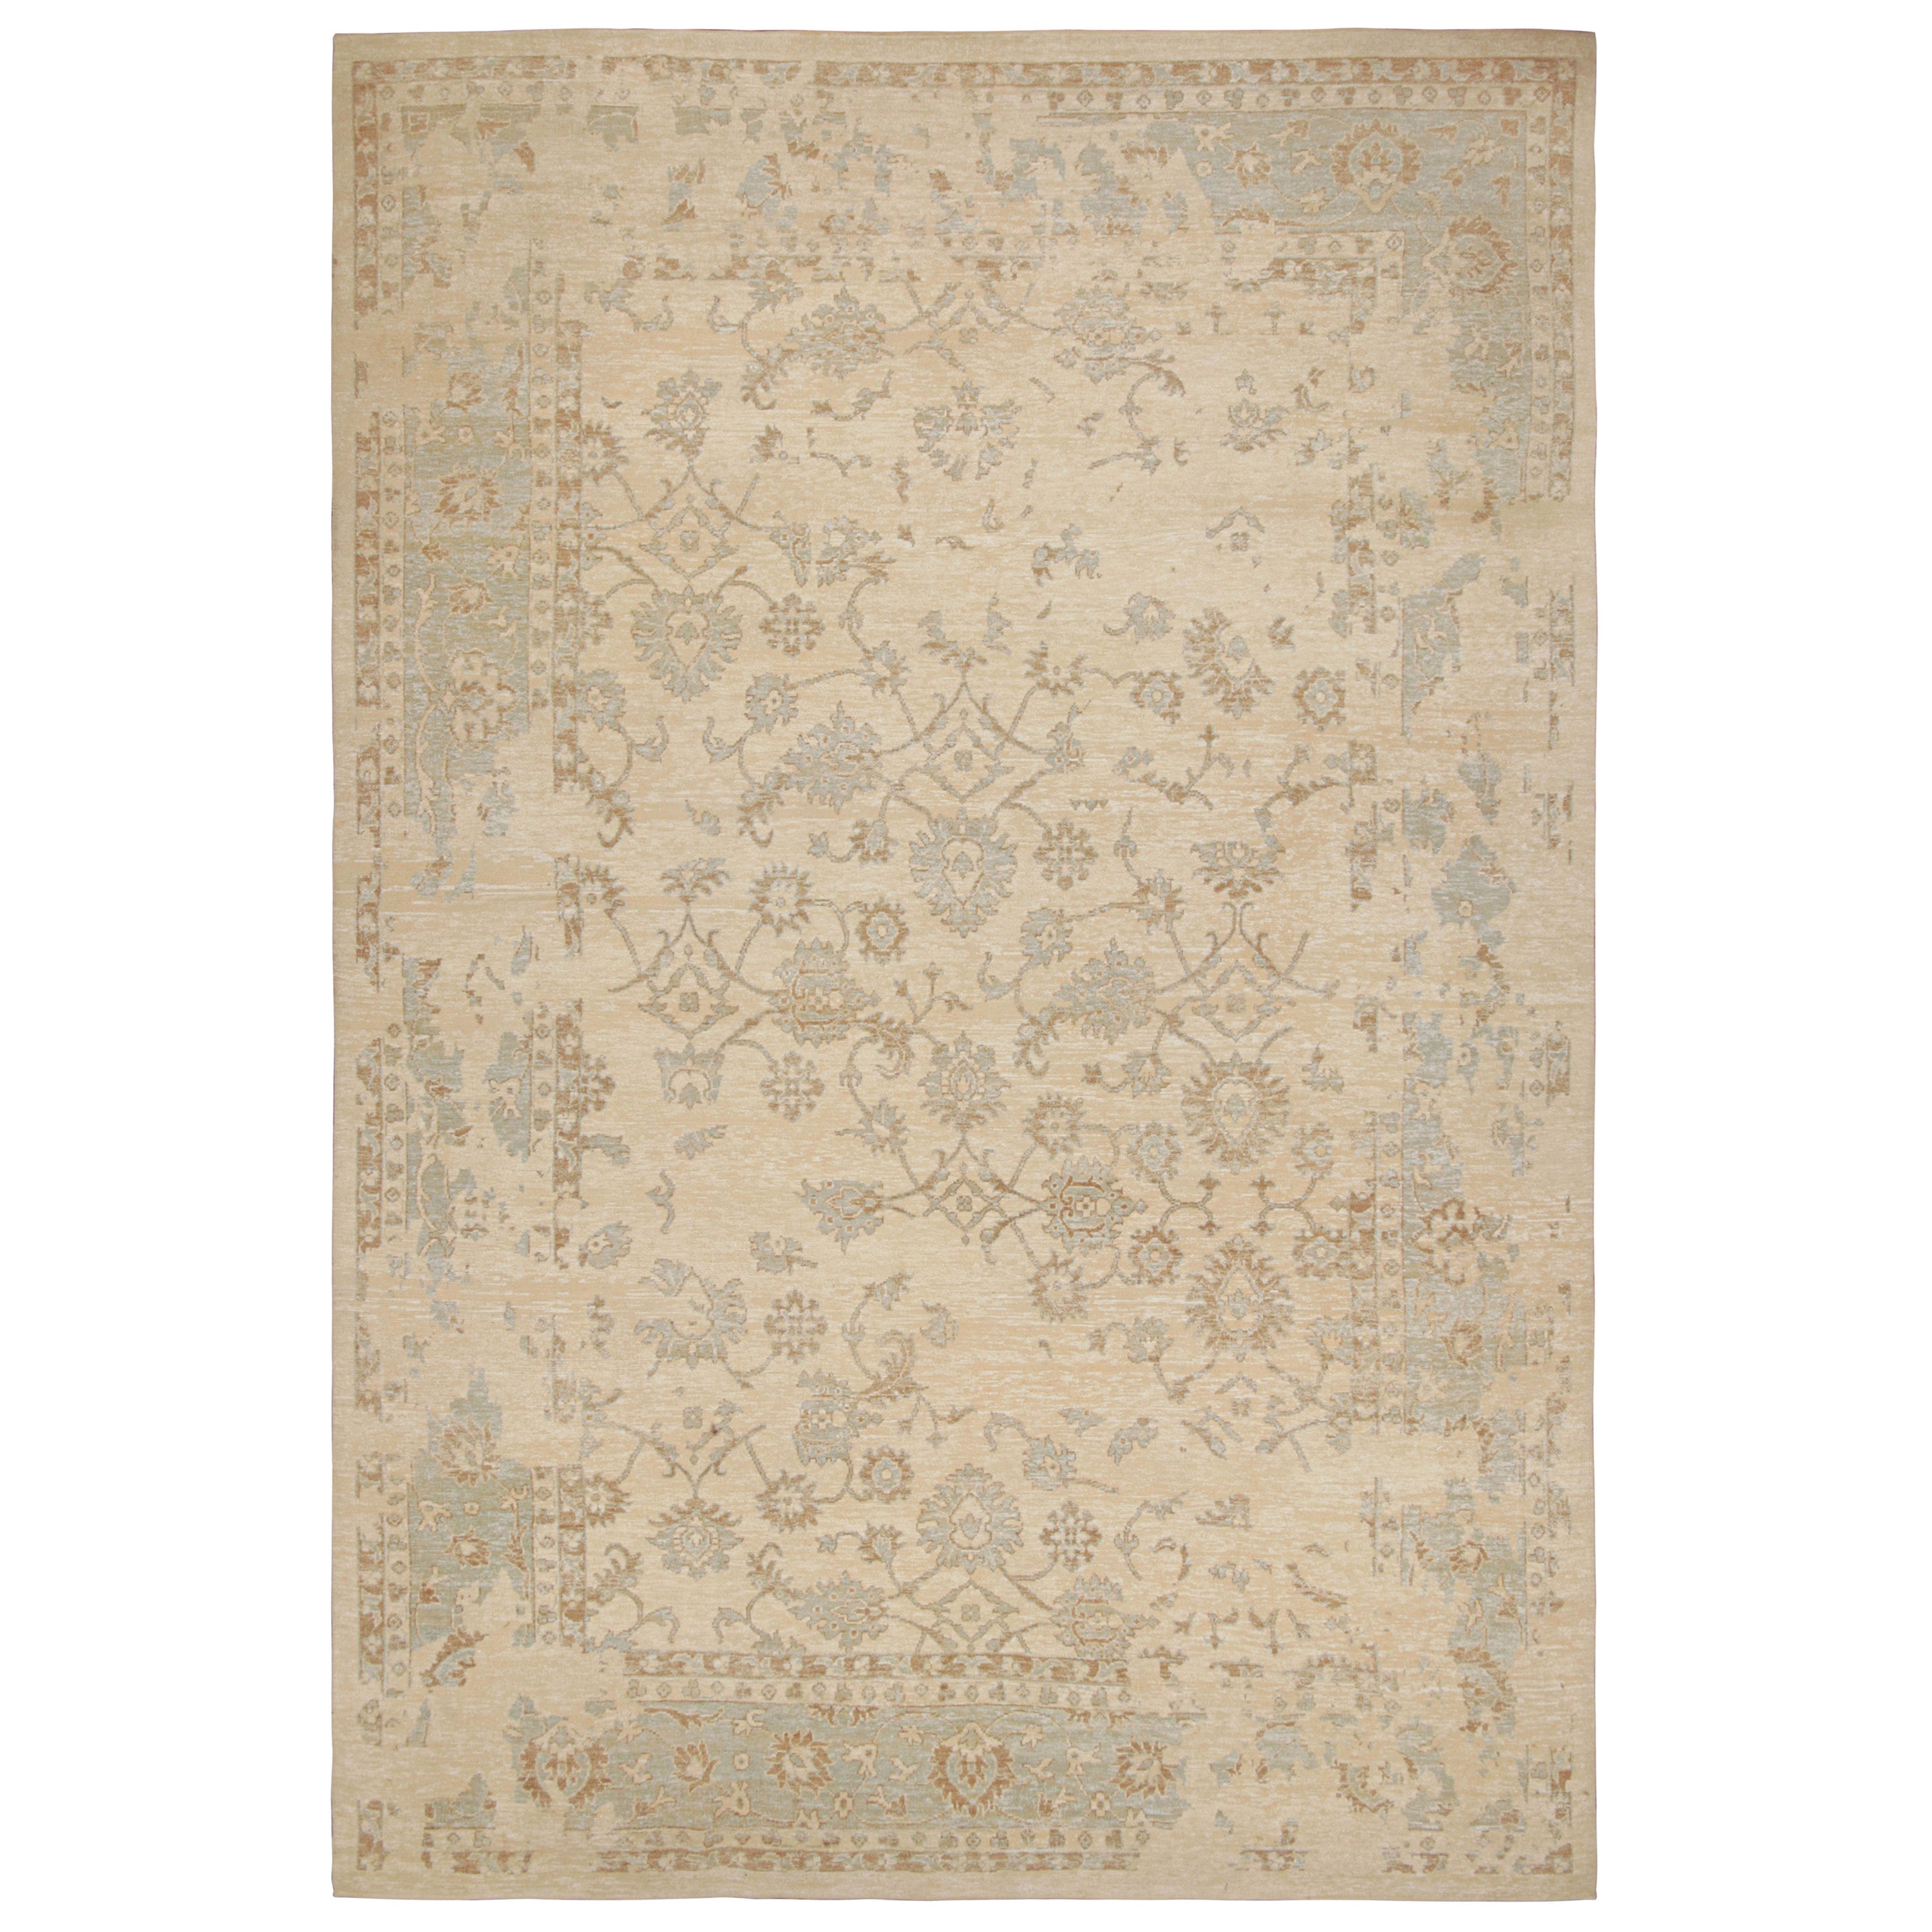 Rug & Kilim’s Oushak Style Oversized Rug in Beige/Brown, With Floral Patterns